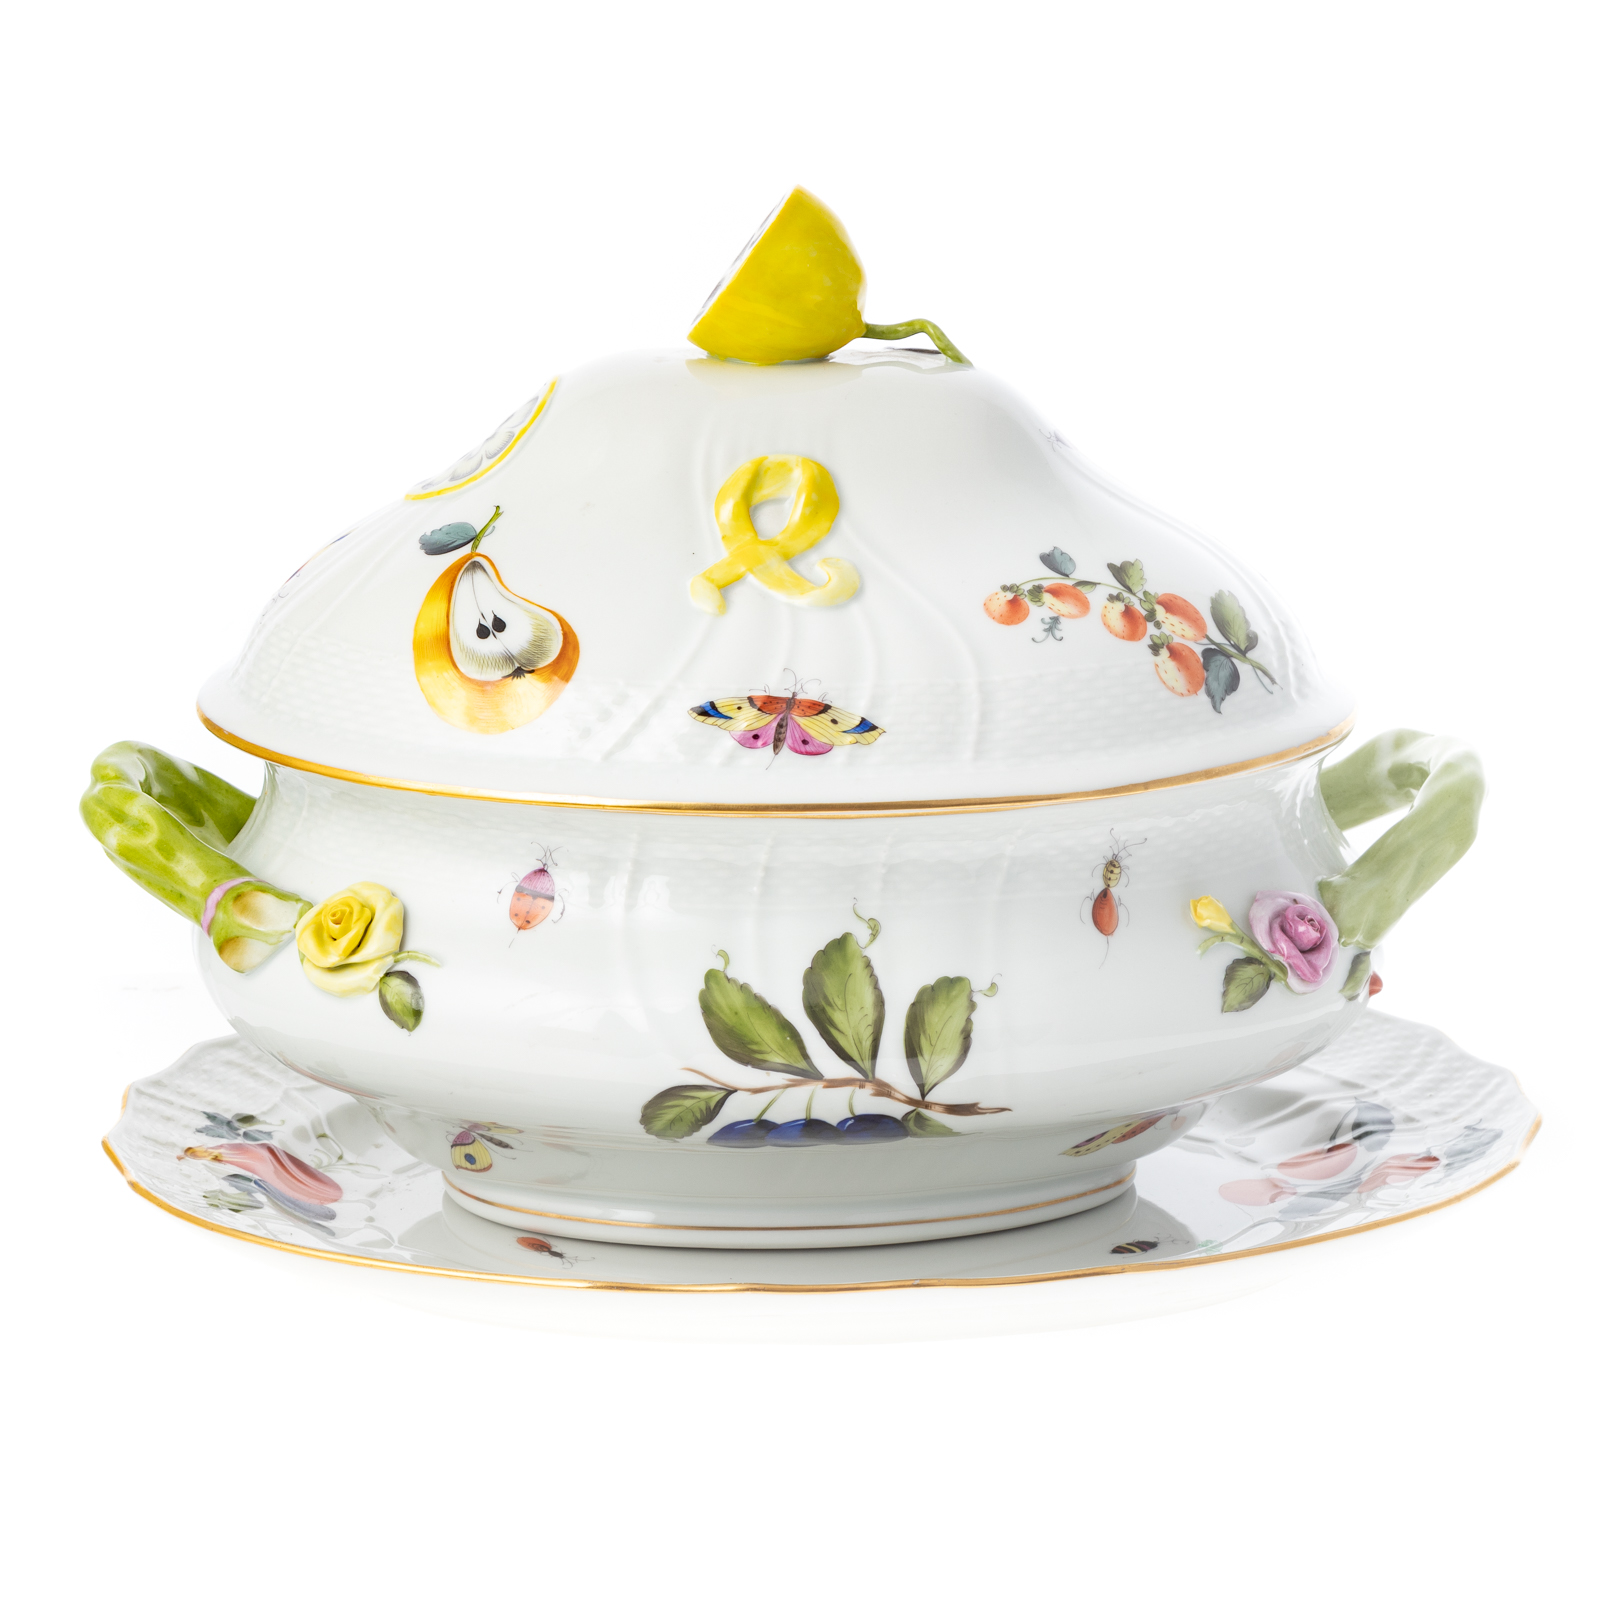 HEREND FRUITS & FLOWERS SOUP TUREEN